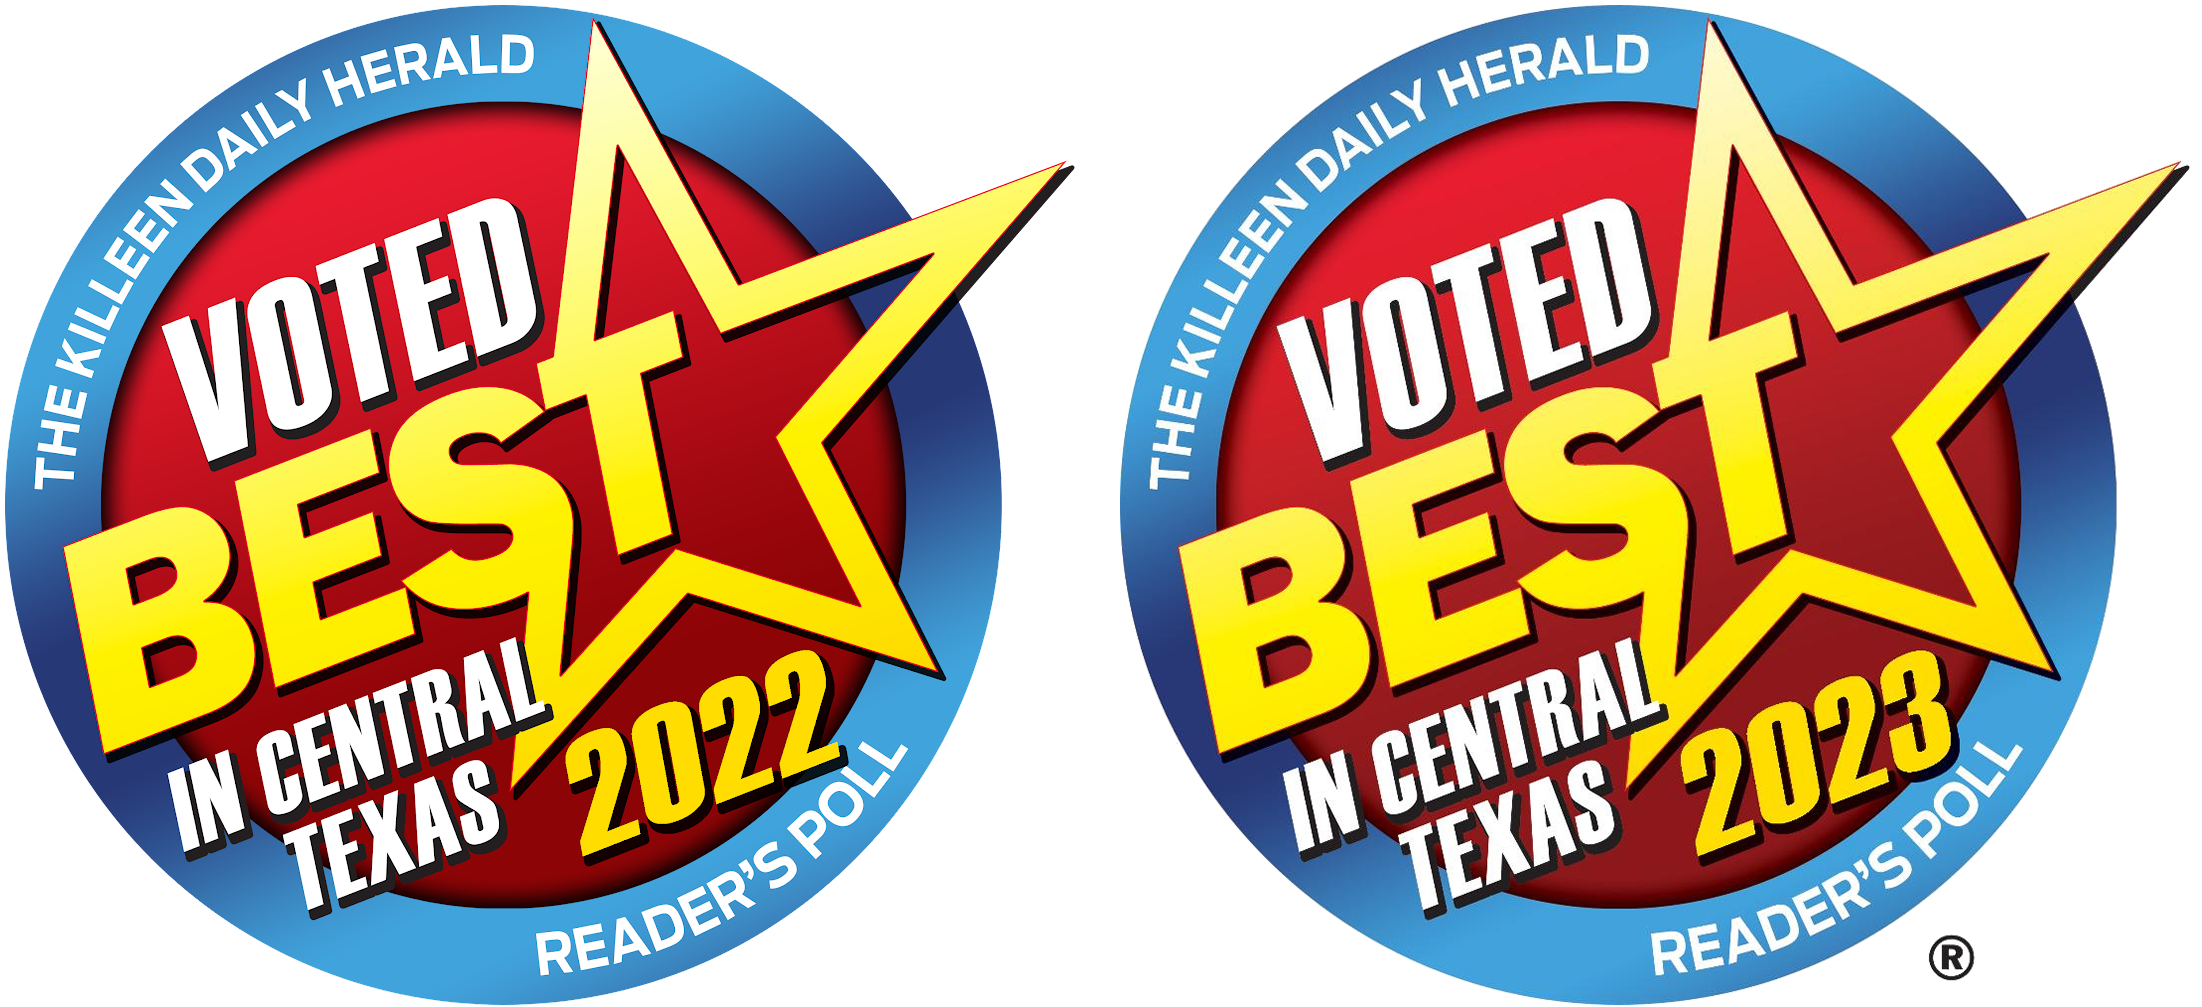 Voted Best Pest Control Service in Central Texas